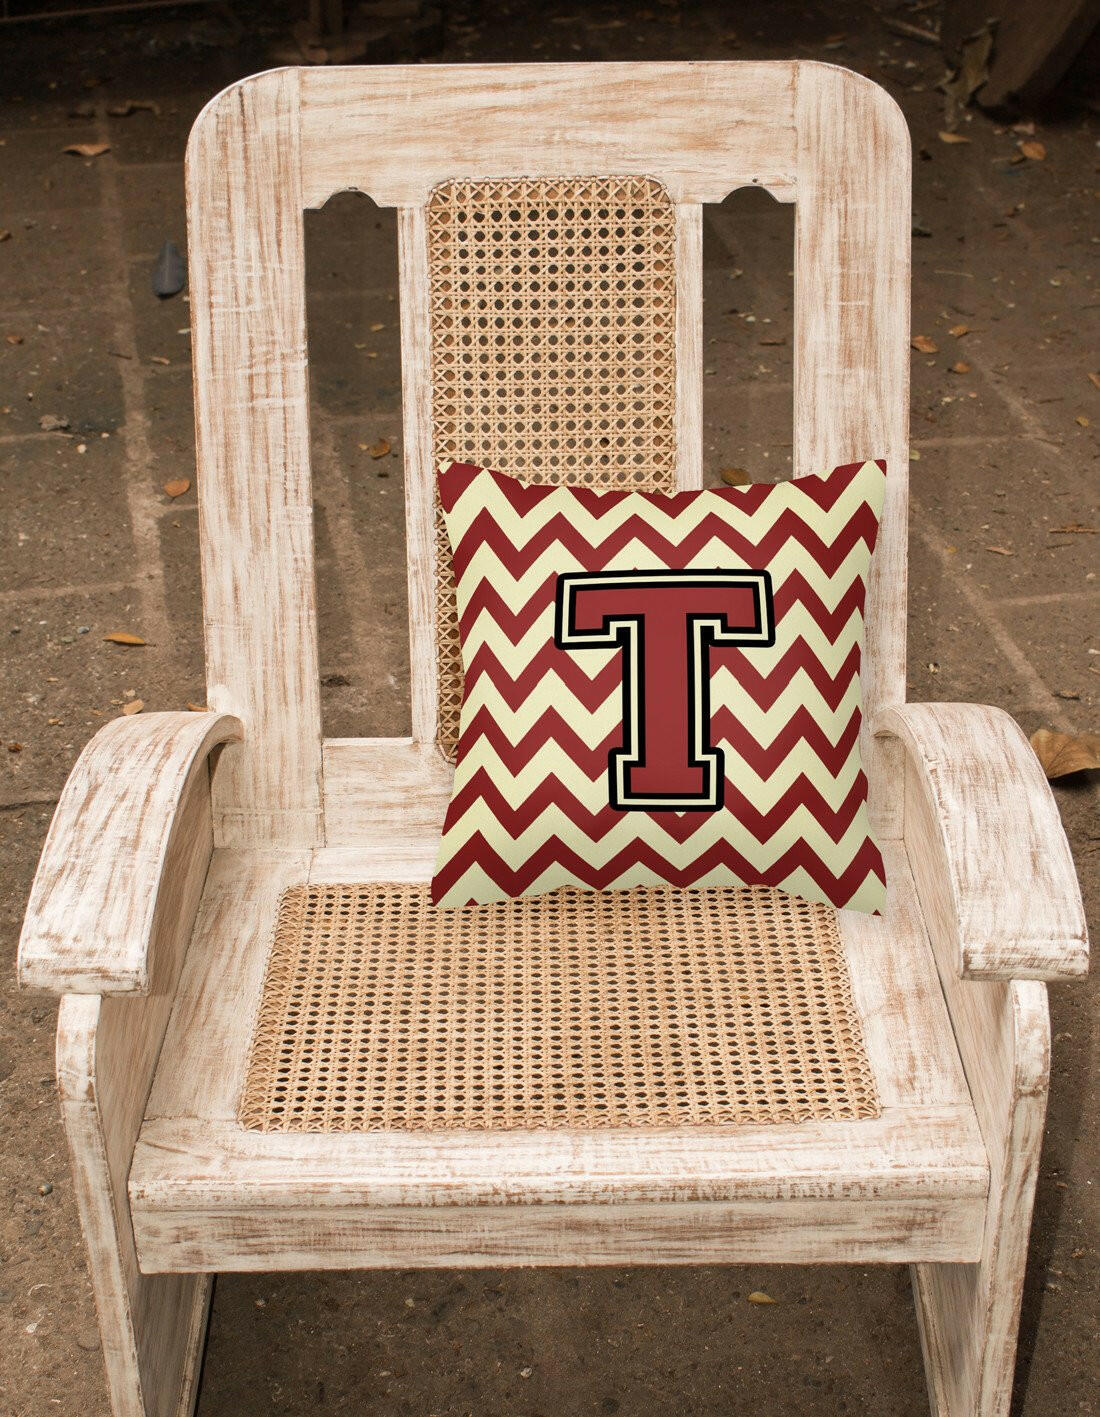 Letter T Chevron Maroon and Gold Fabric Decorative Pillow CJ1061-TPW1414 by Caroline's Treasures